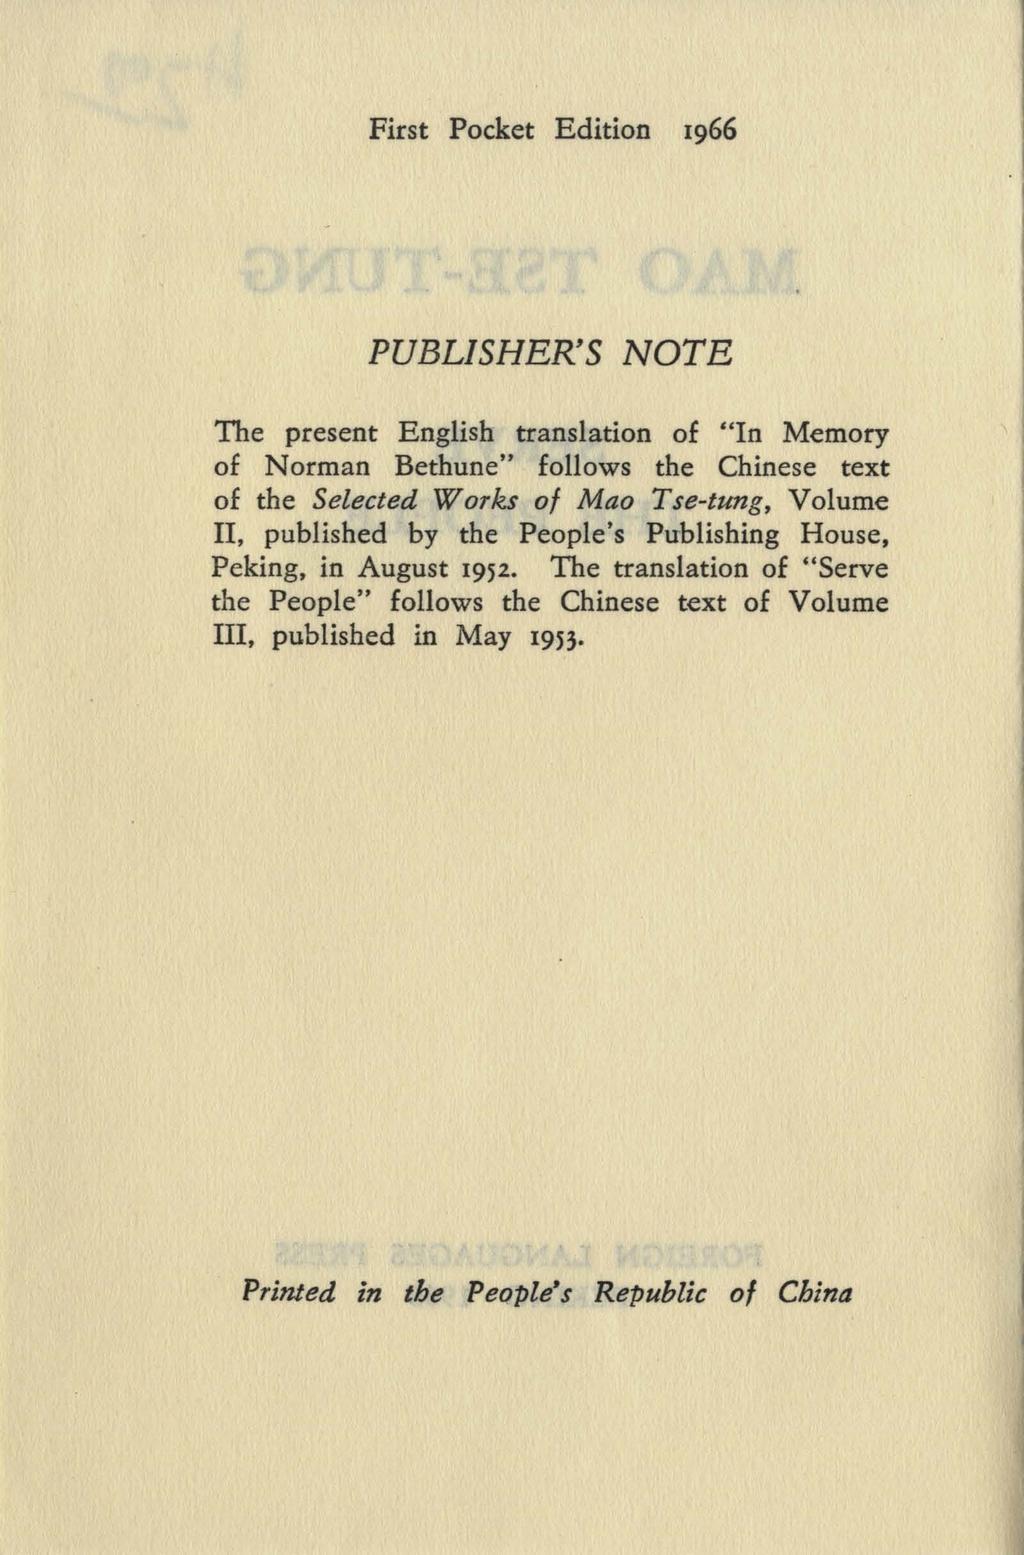 First Pocket Edition 1966 PUBLISHER'S NOTE The present English translation of "In Memory of Norman Bethune" follows the Chinese text of the Selected Works of Mao Tse-tung, Volume II, published by